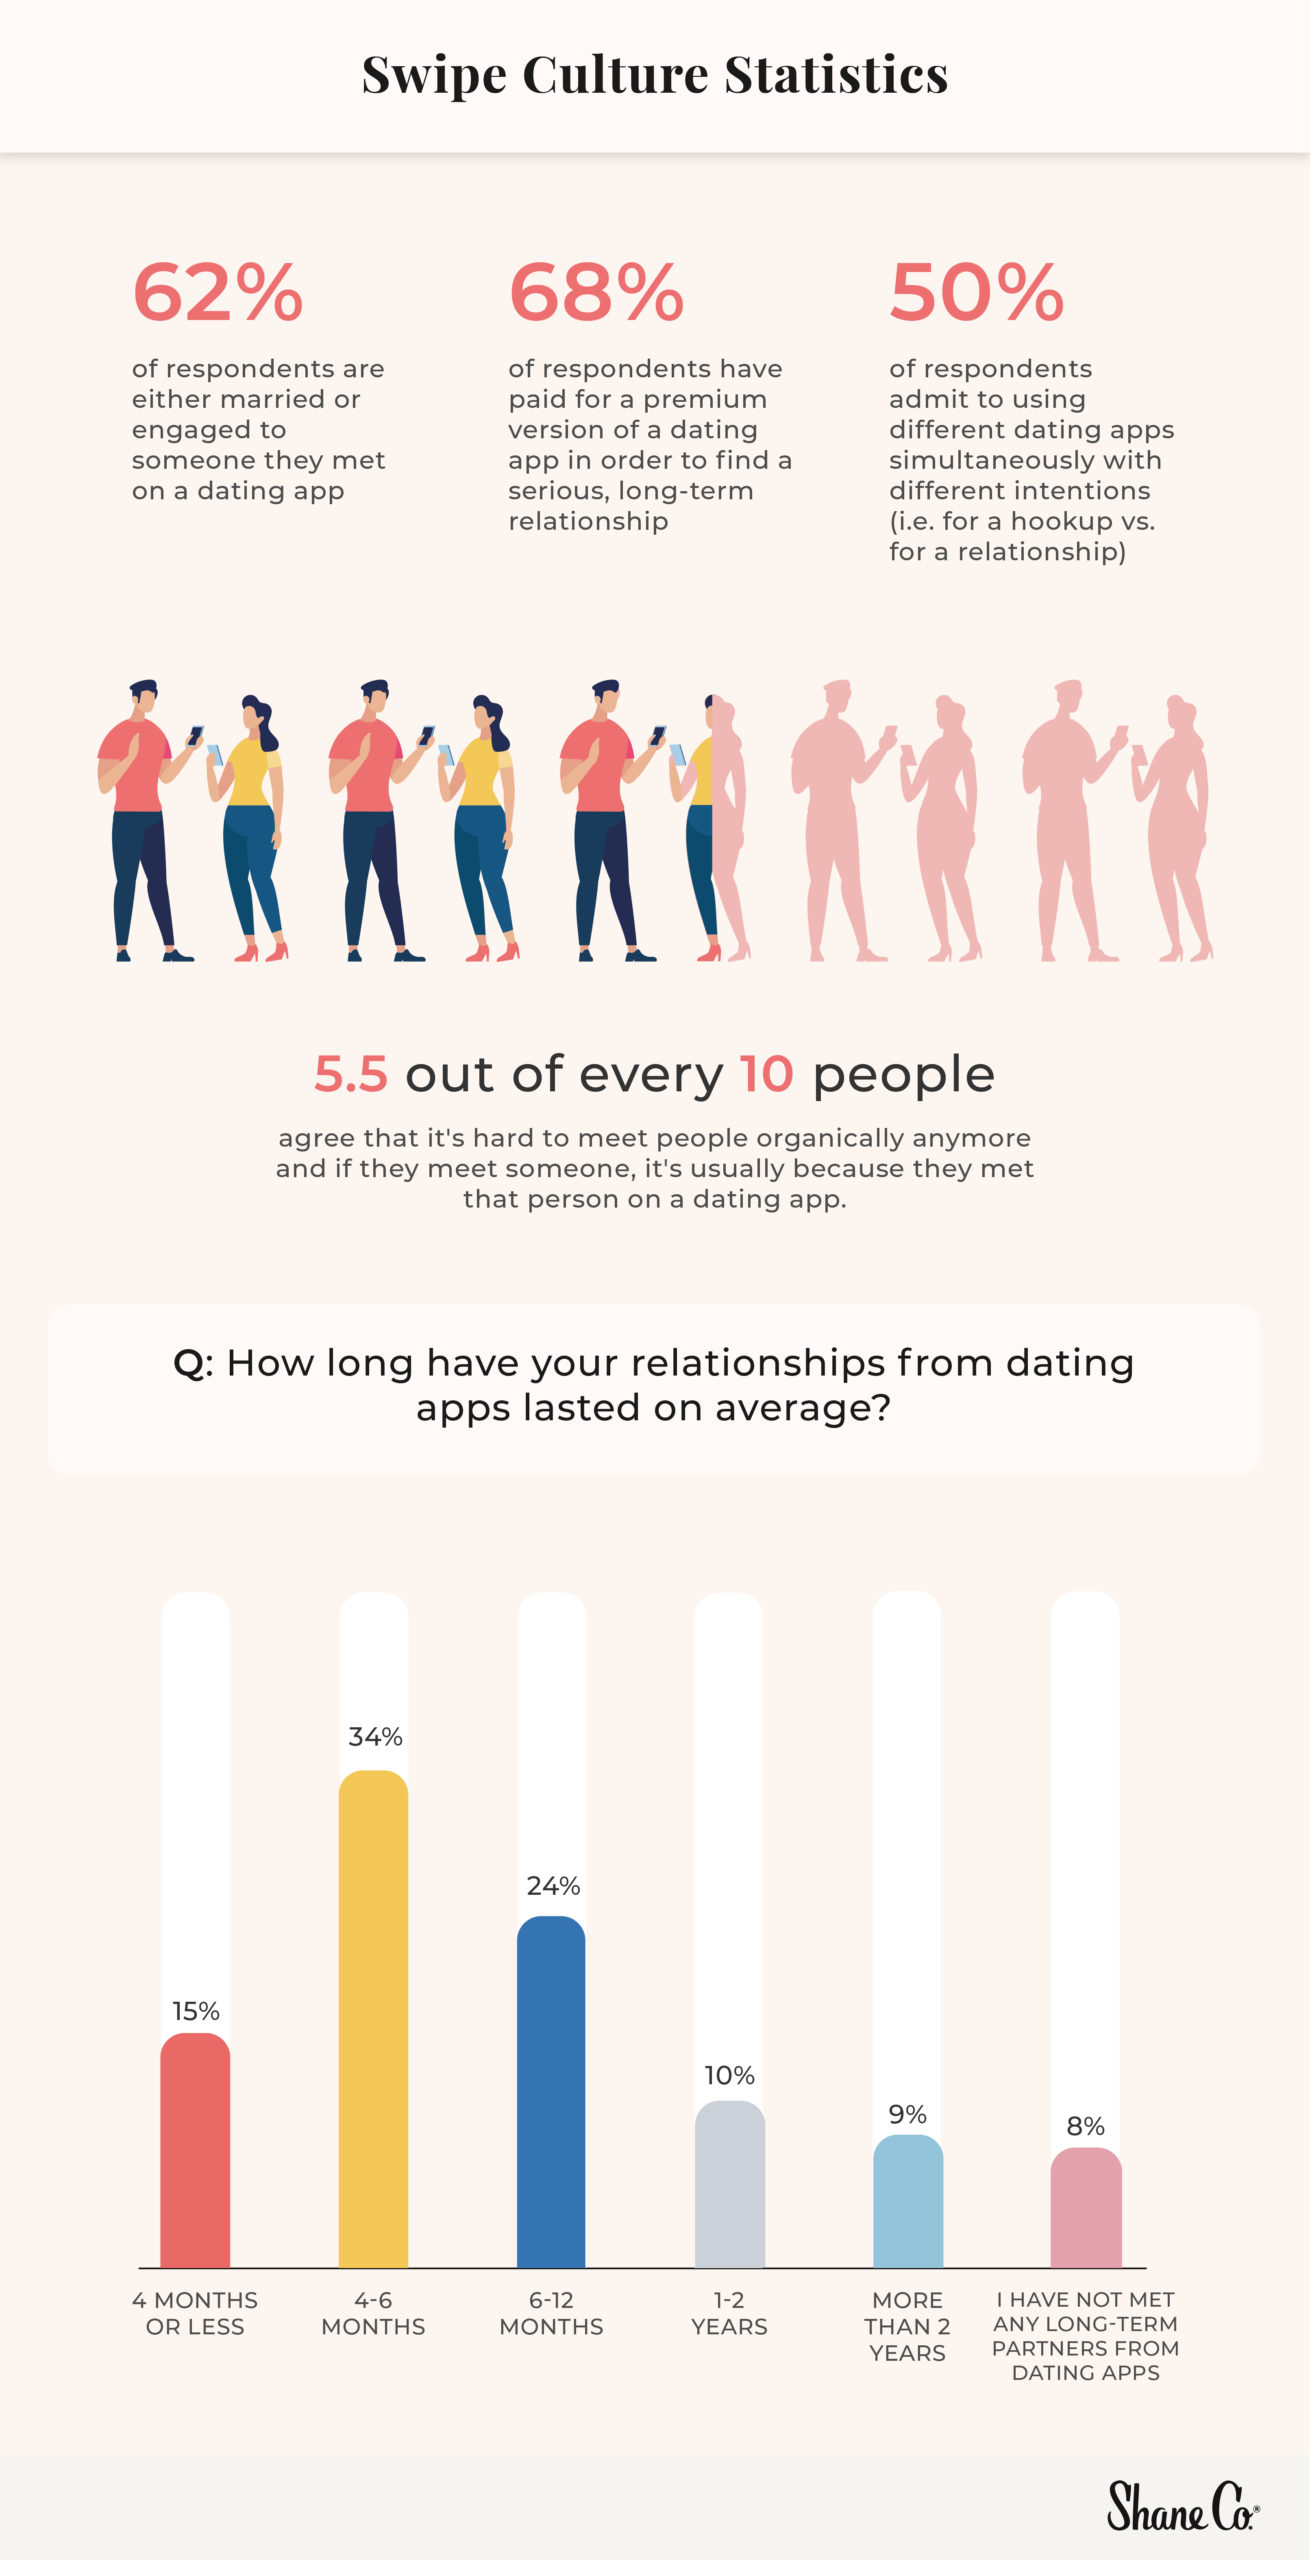 A graphic representing swipe culture statistics and the average length of relationships.